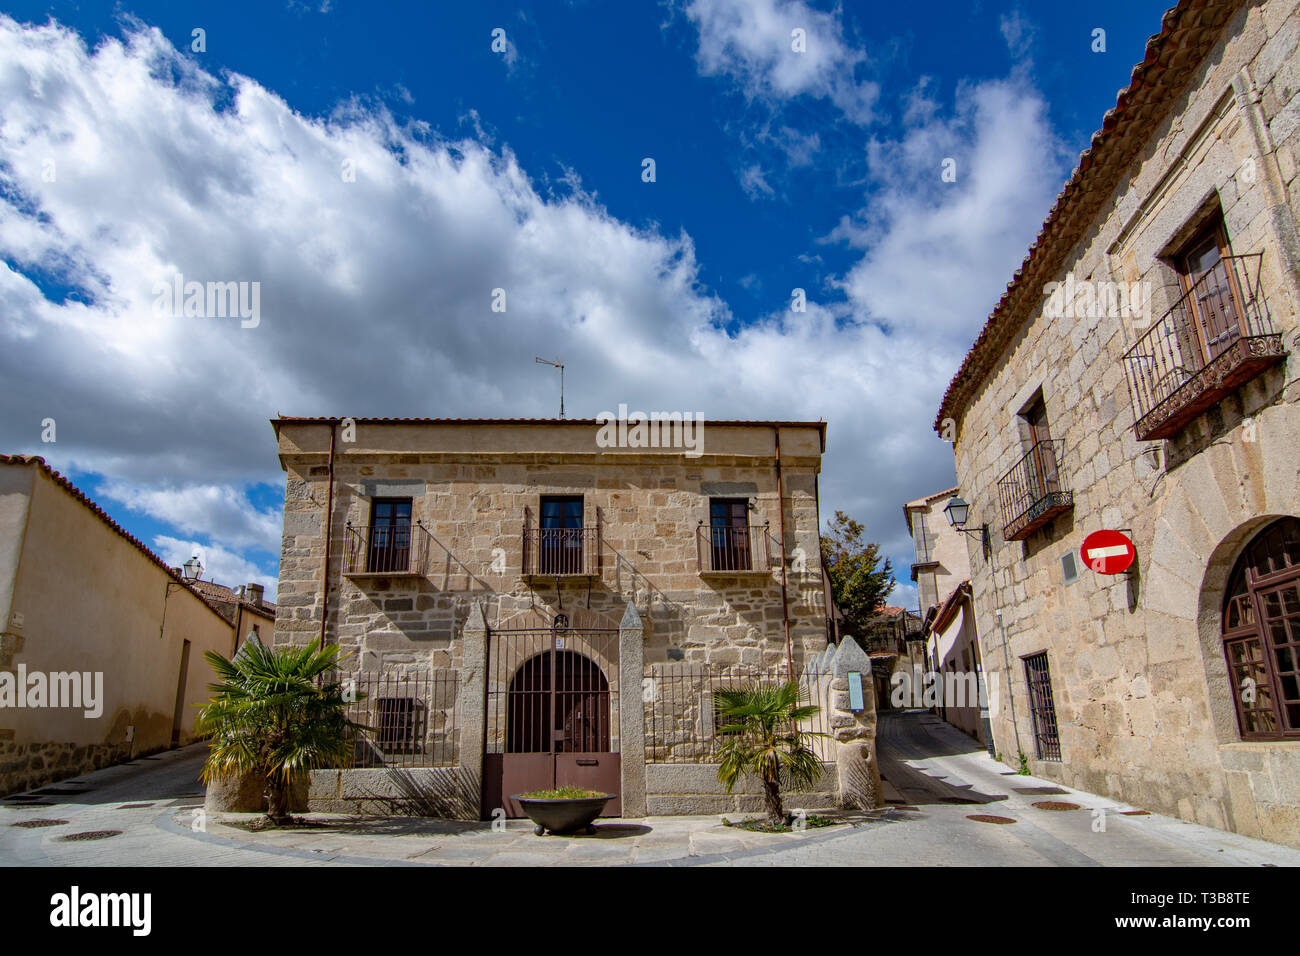 Ledesma, Salamanca, Spain; April 2017: Streets and buildings of the medieval village of Ledesma in province of Salamanca Stock Photo